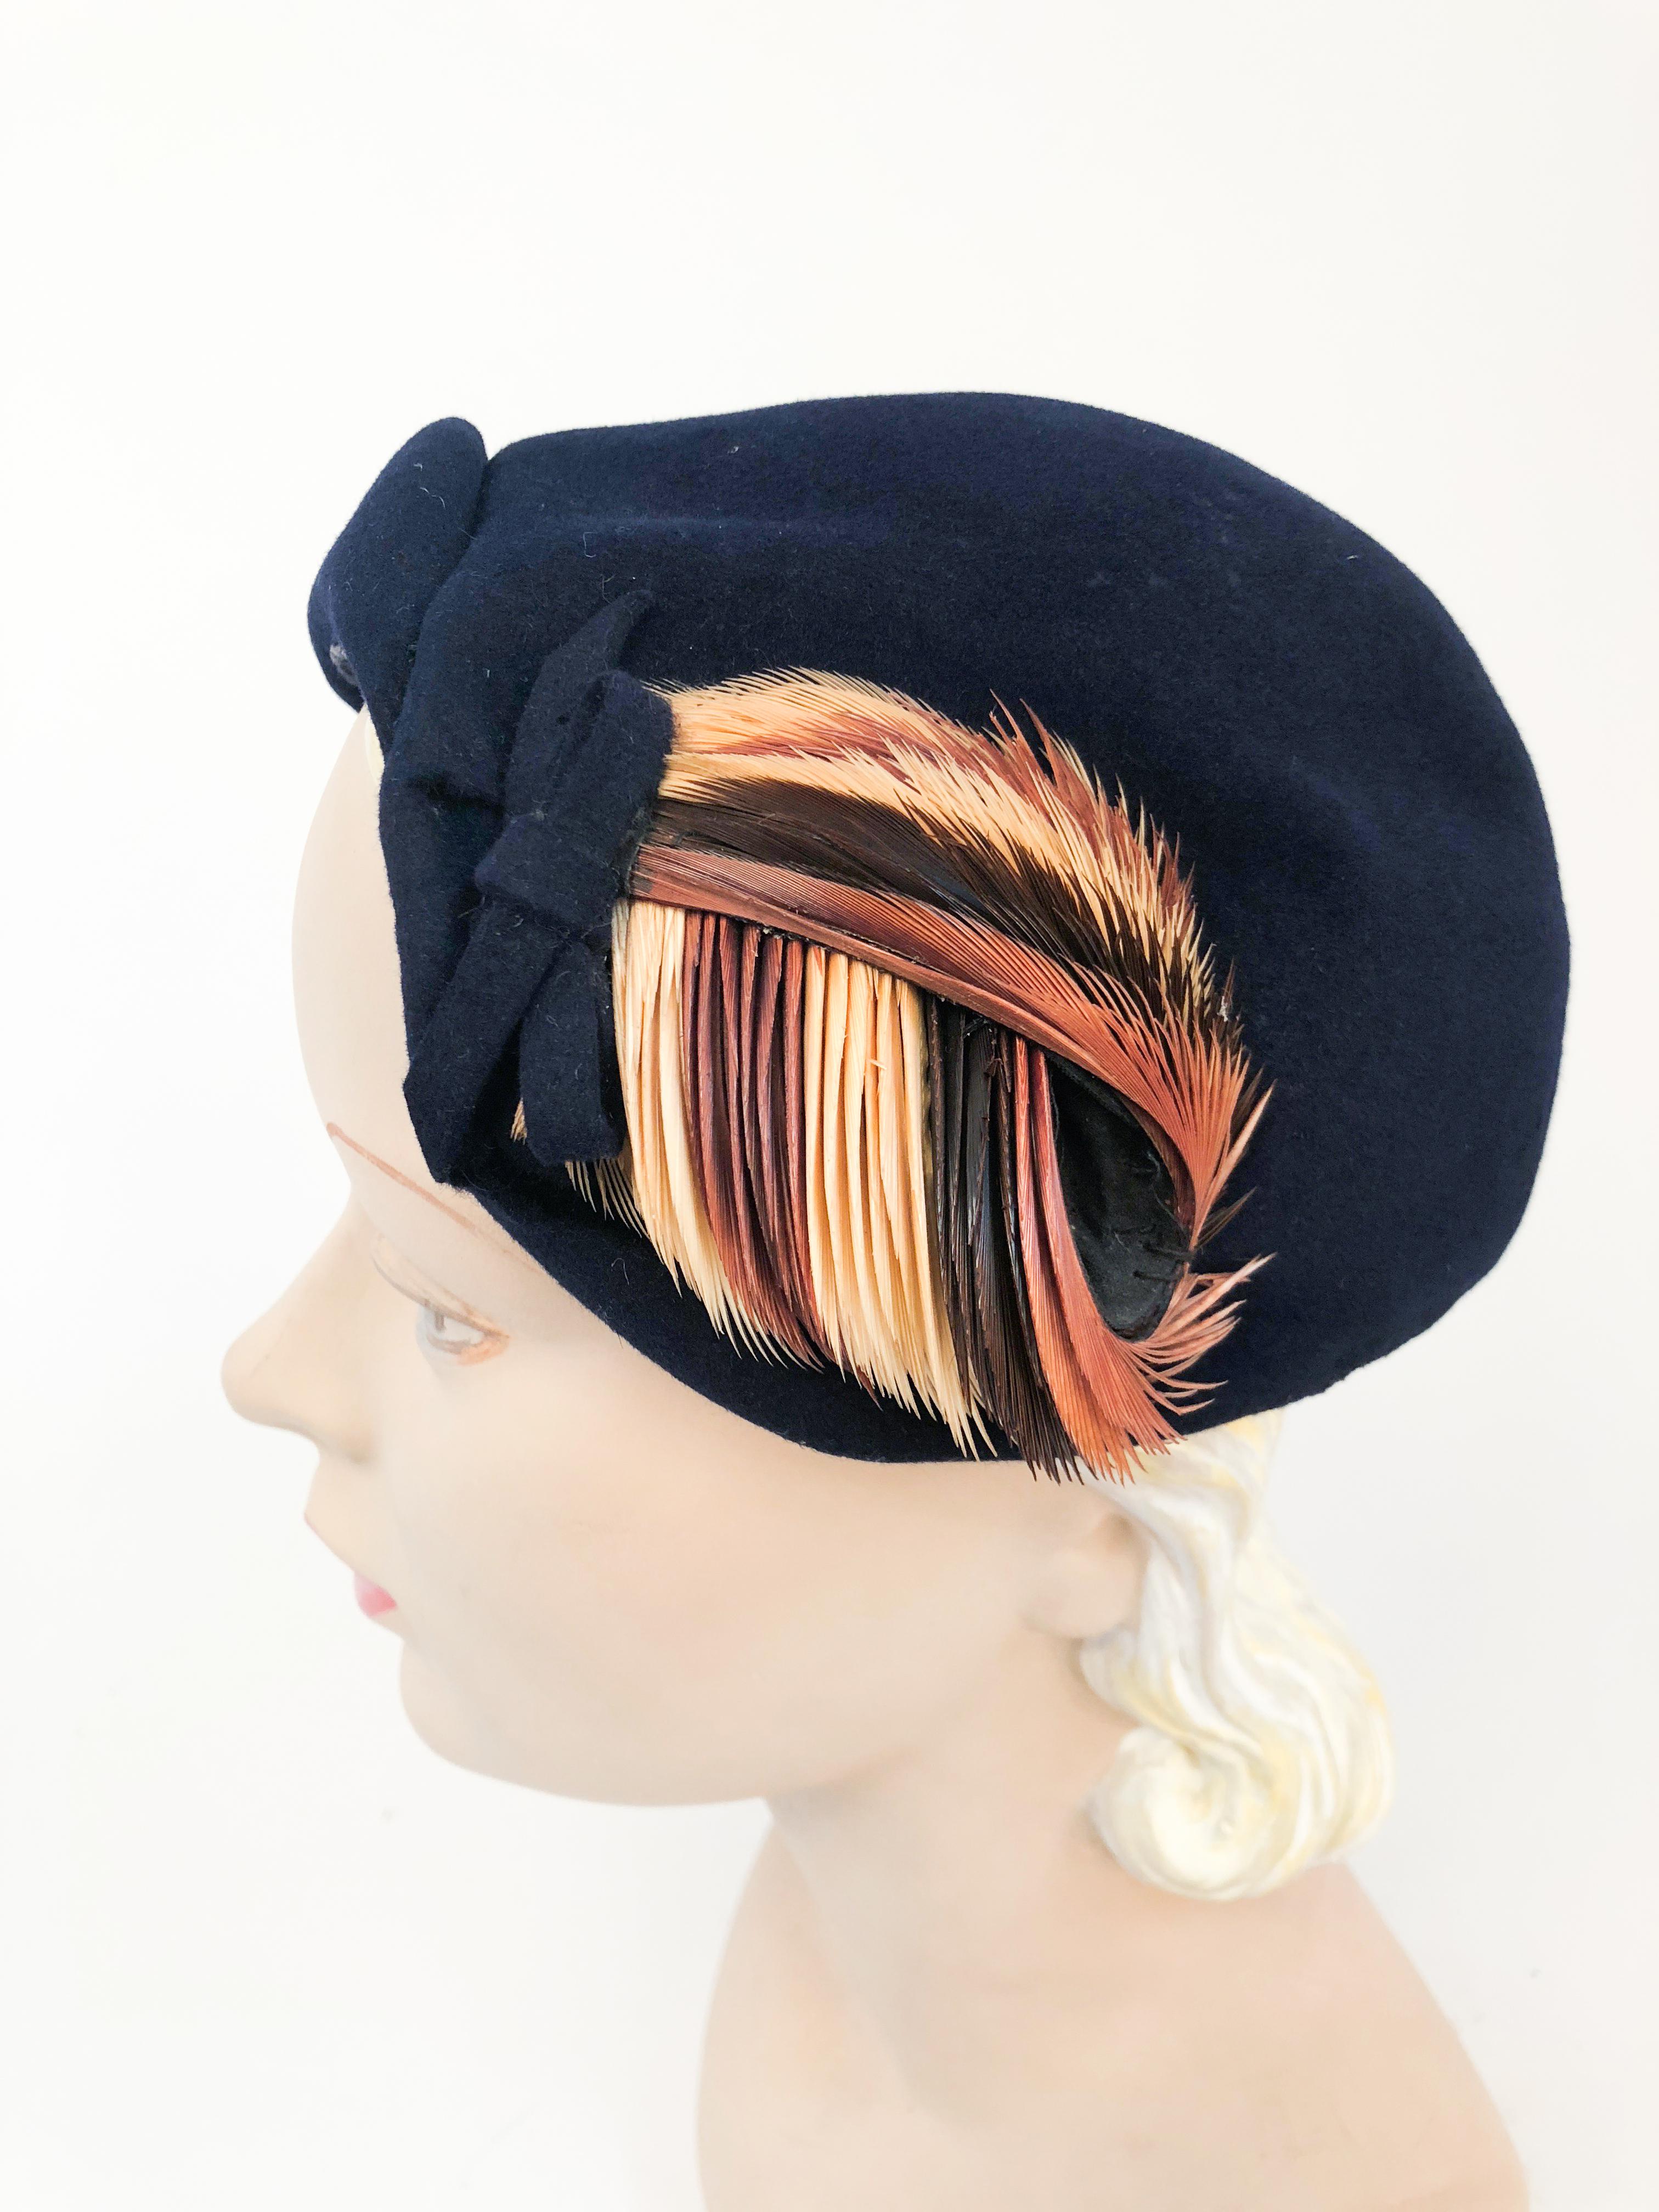 1950s Navy Felt hat with Decorative Feathers that are multi-colored shades of brown. This hat is asymmetrically shaped and has a decorative bow